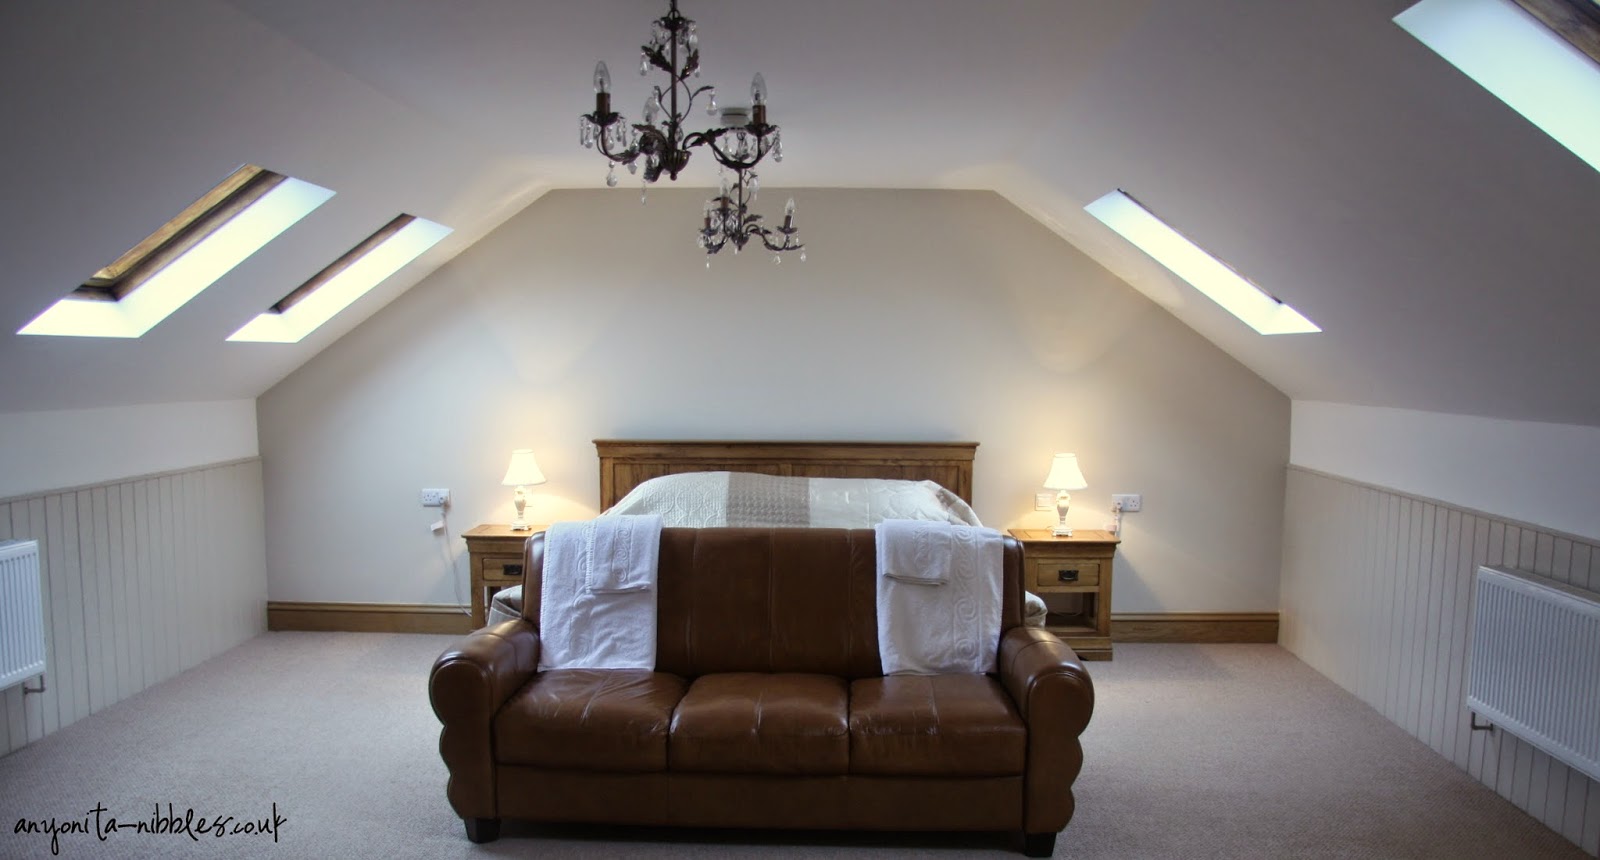 Our king-sized bedroom nestled in the North Yorkshire Moors| Anyonita-nibbles.co.uk